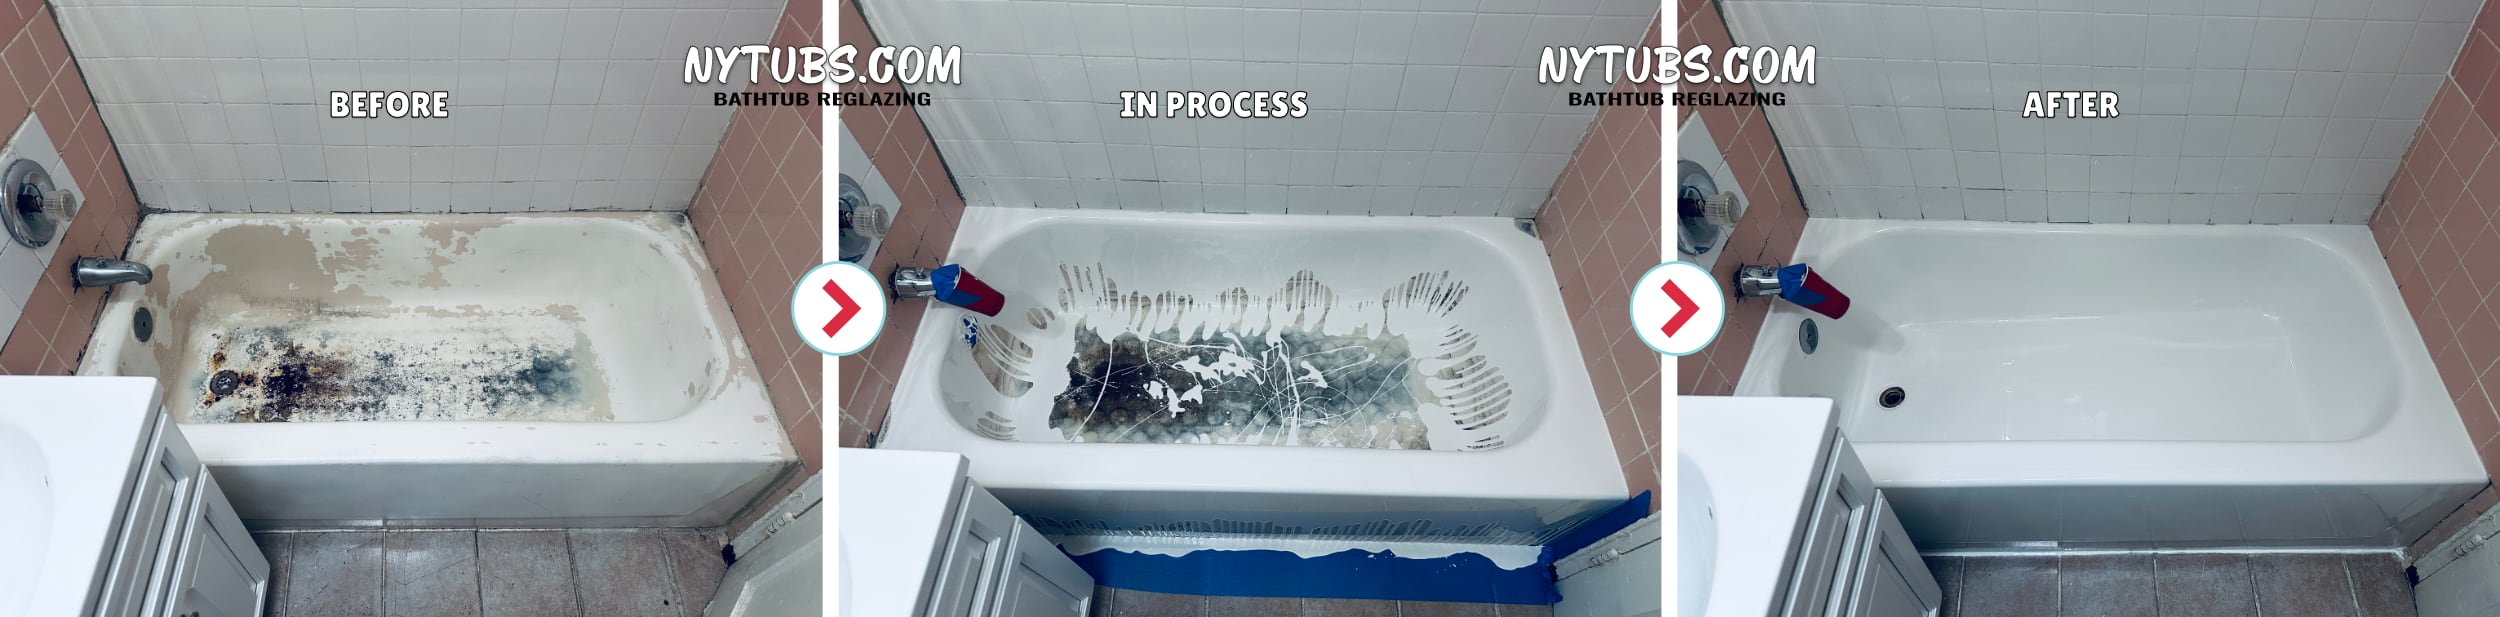 Bathtub Resurfacing Before and After